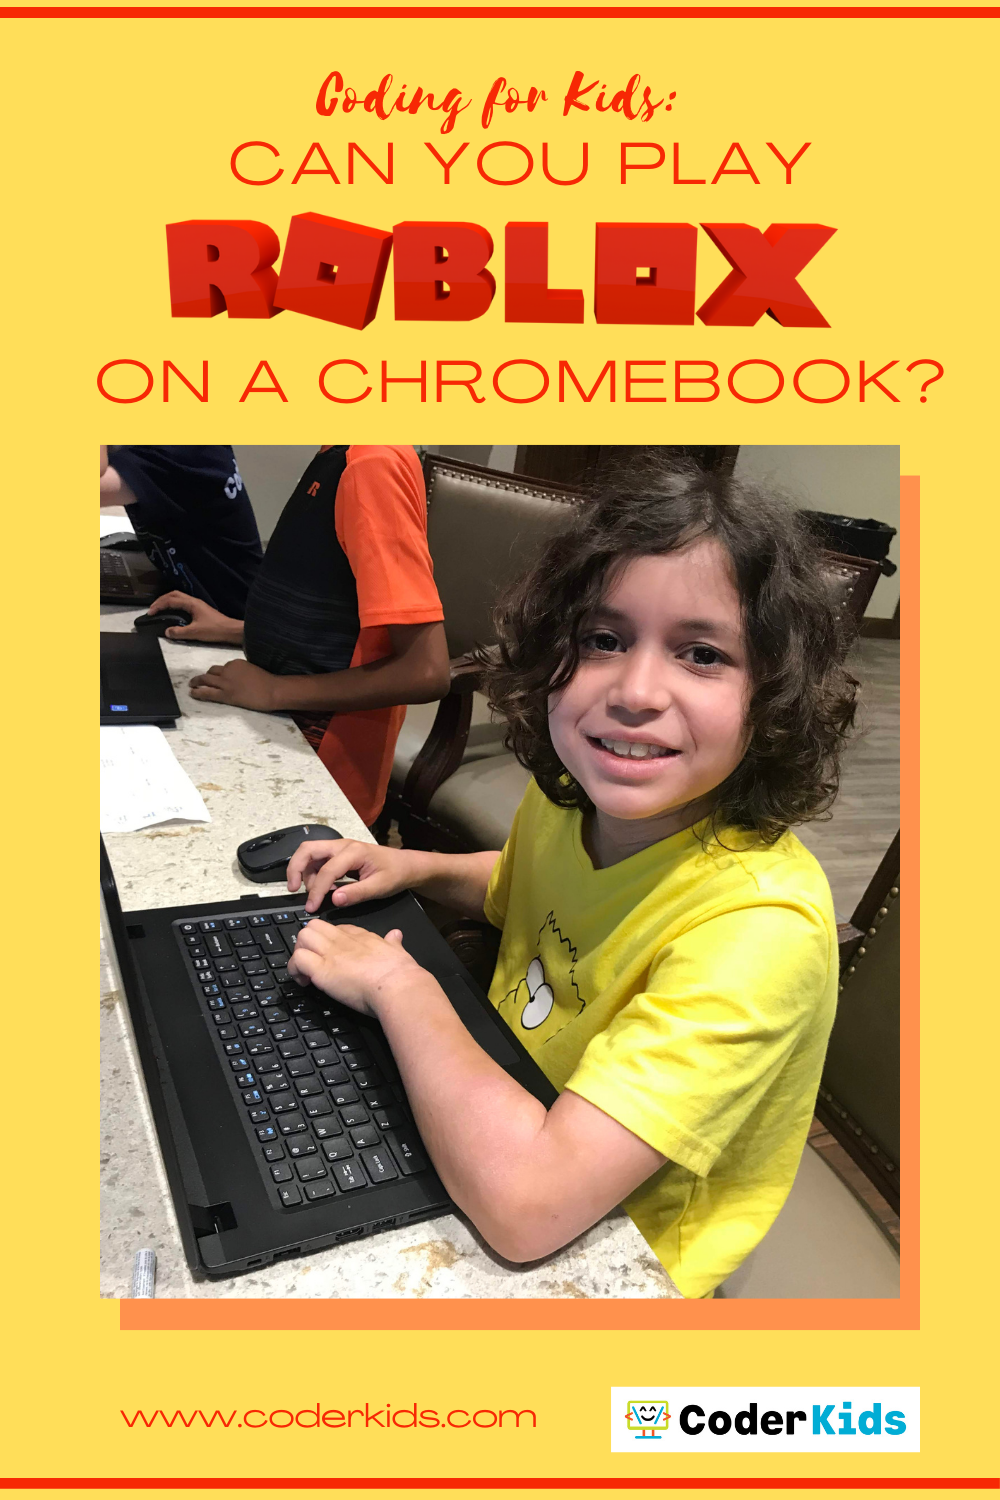 Here's How to Play 'Roblox' on a School Chromebook